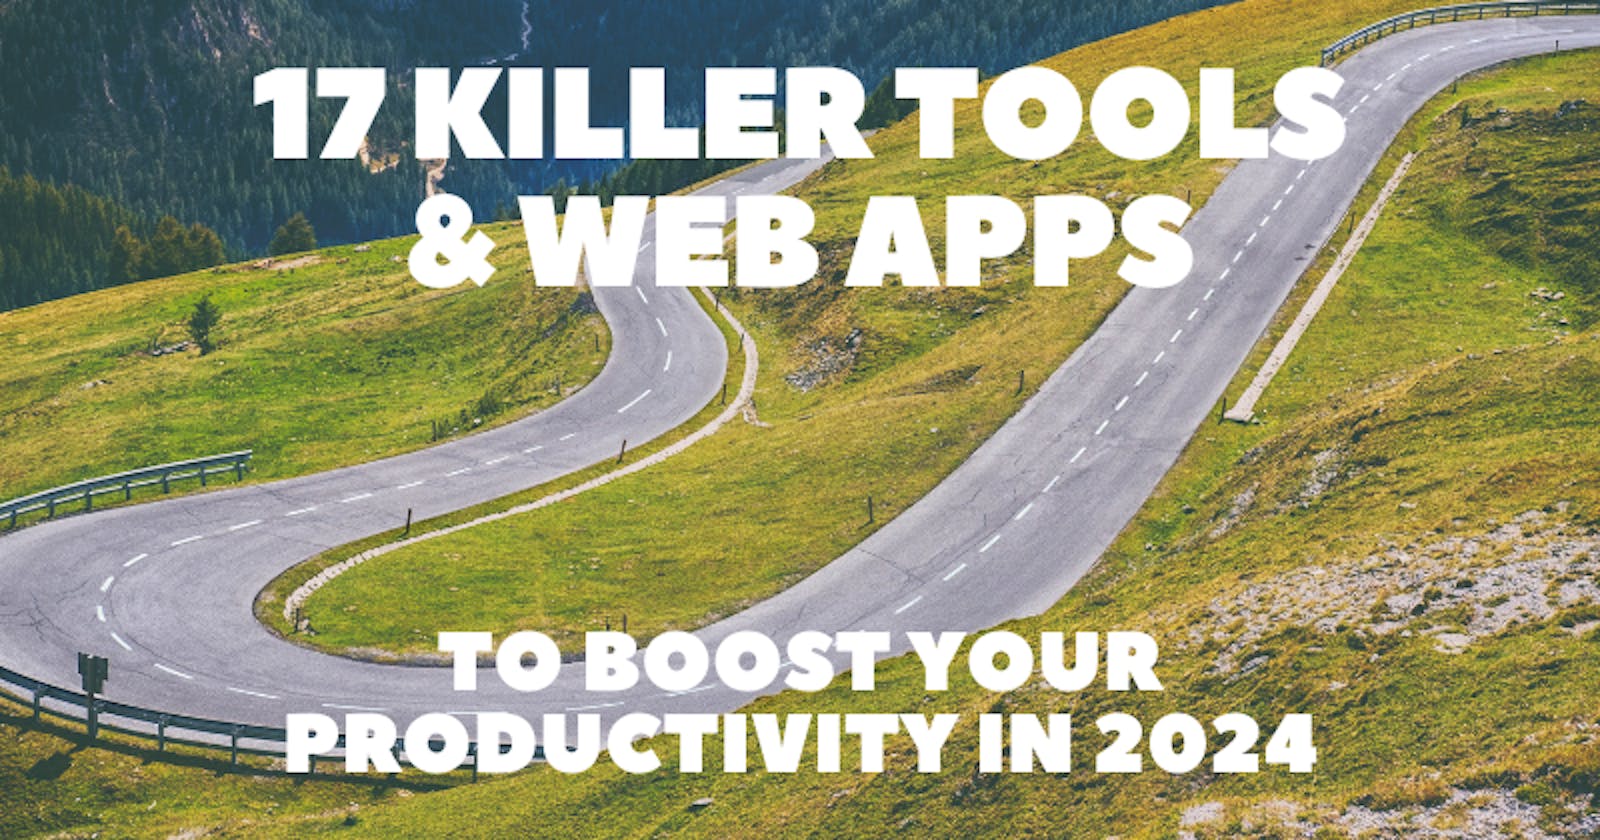 17 Killer Tools & Web Apps to Boost Your Productivity in 2024 🚀⚡